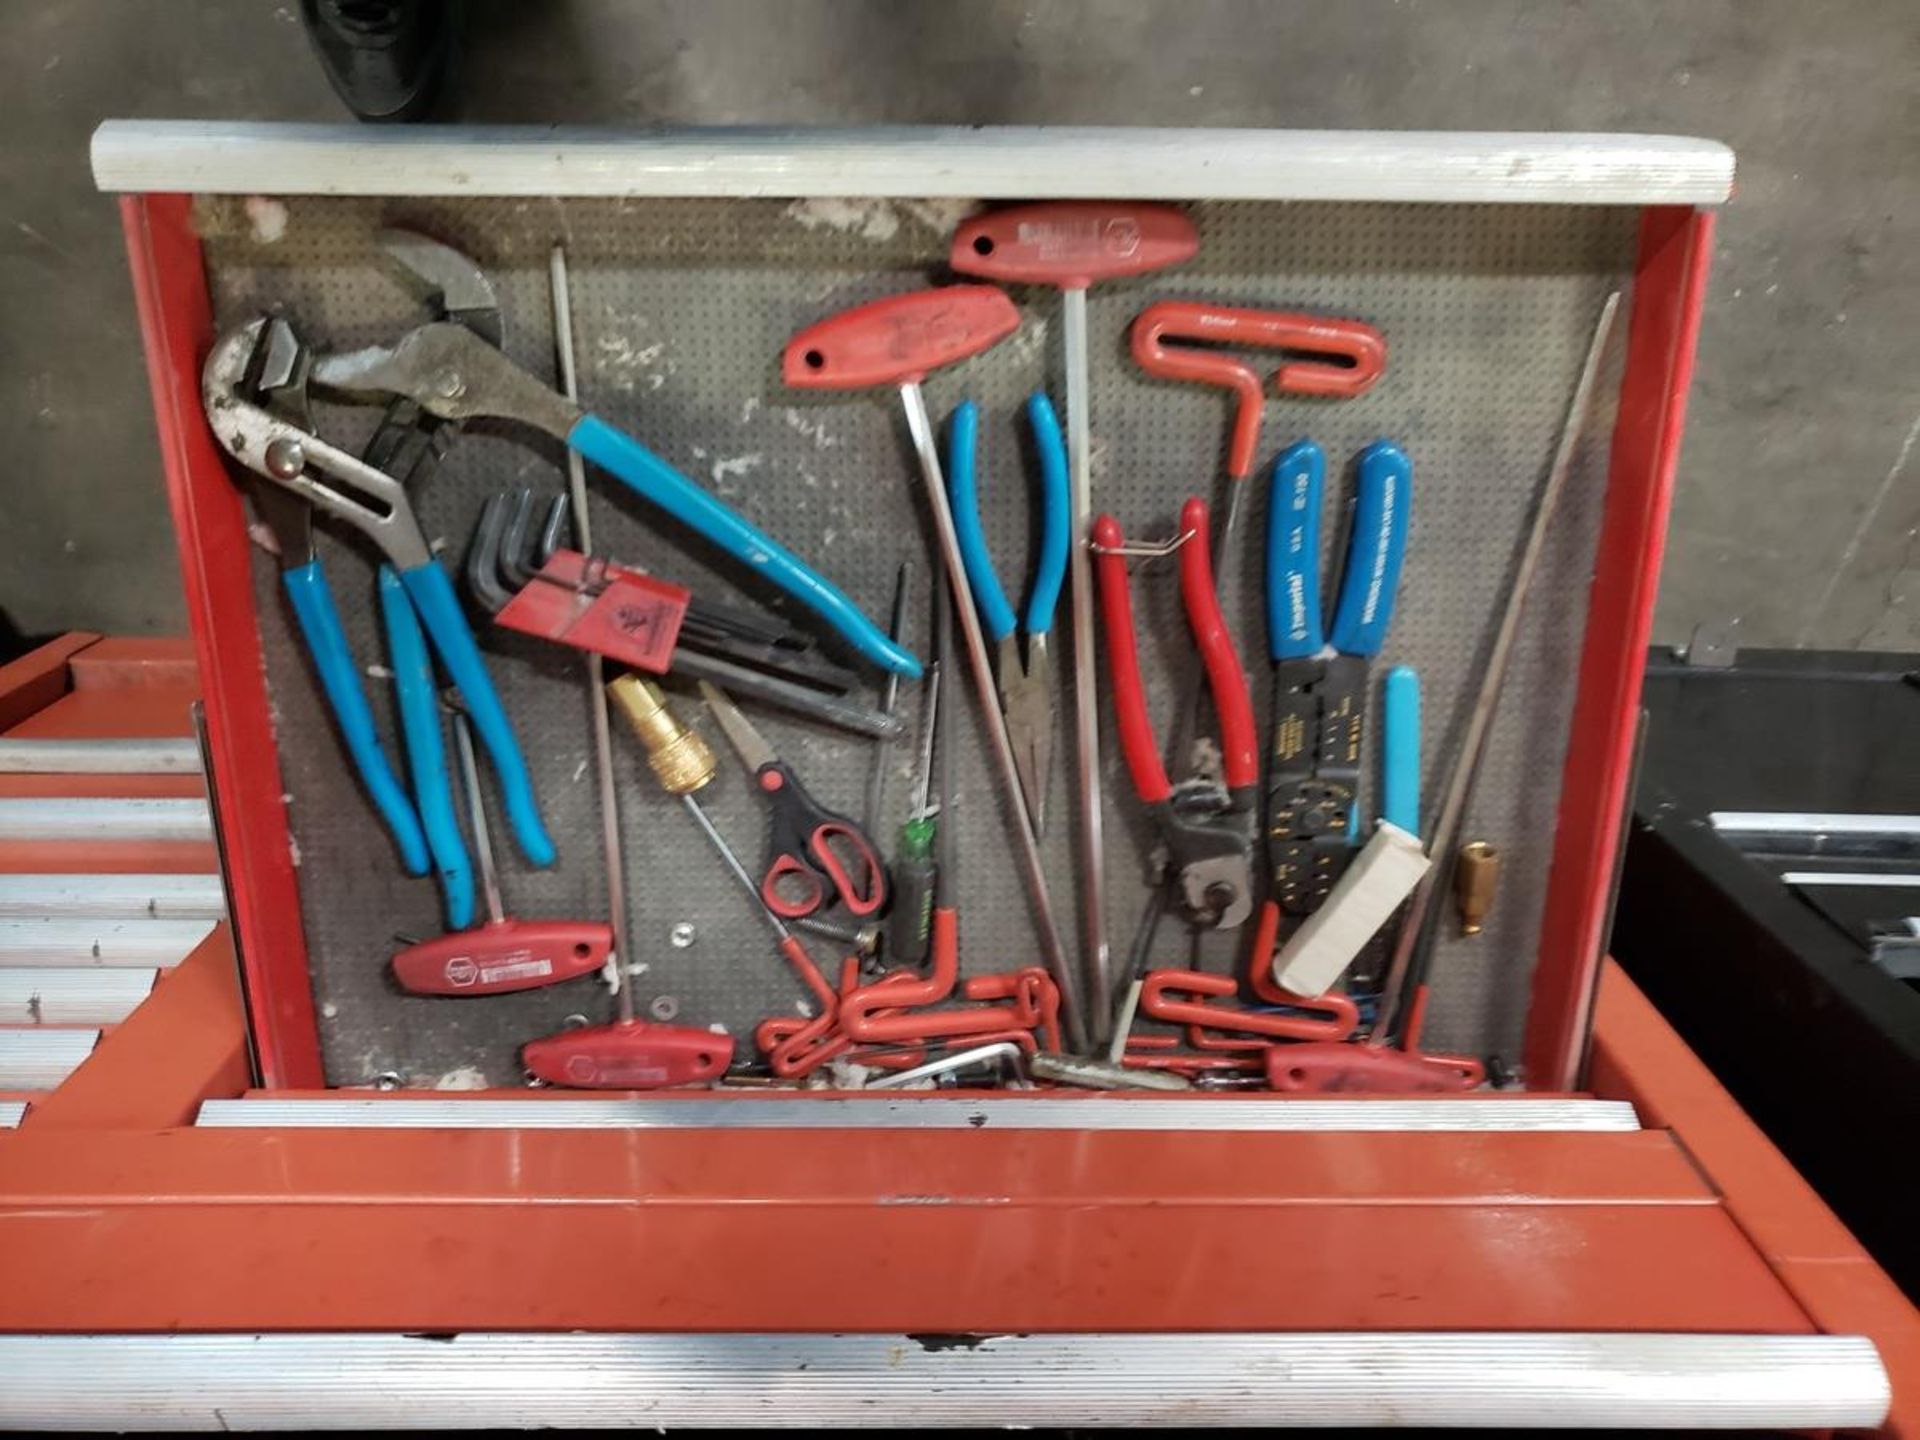 Lyon Bottom Tool Chest, W/ Contents, (See Additional Pictures) Rig Fee: $25 - Image 4 of 4